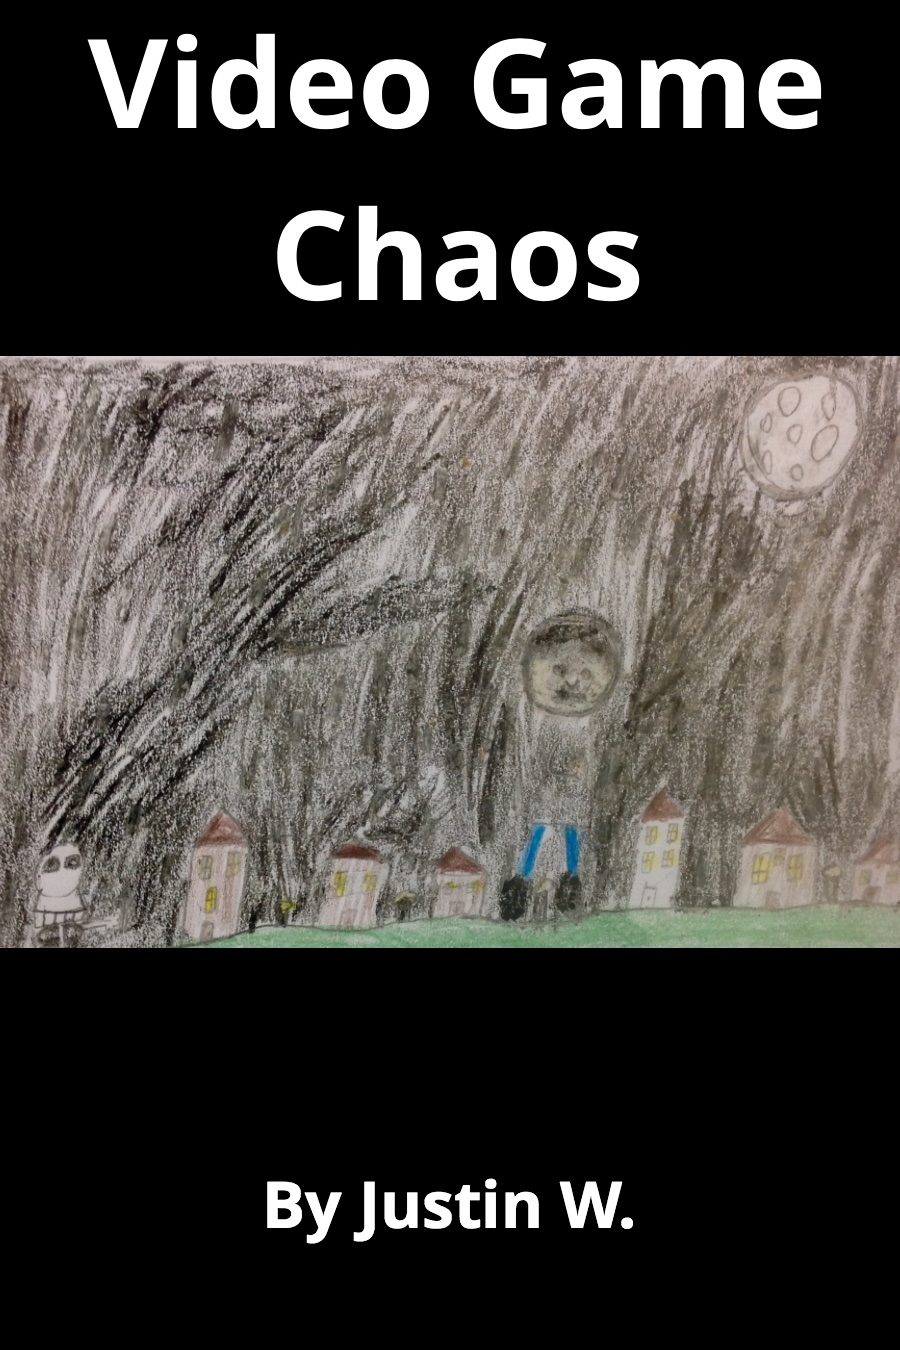 Video Games Chaos by Justin W (1)